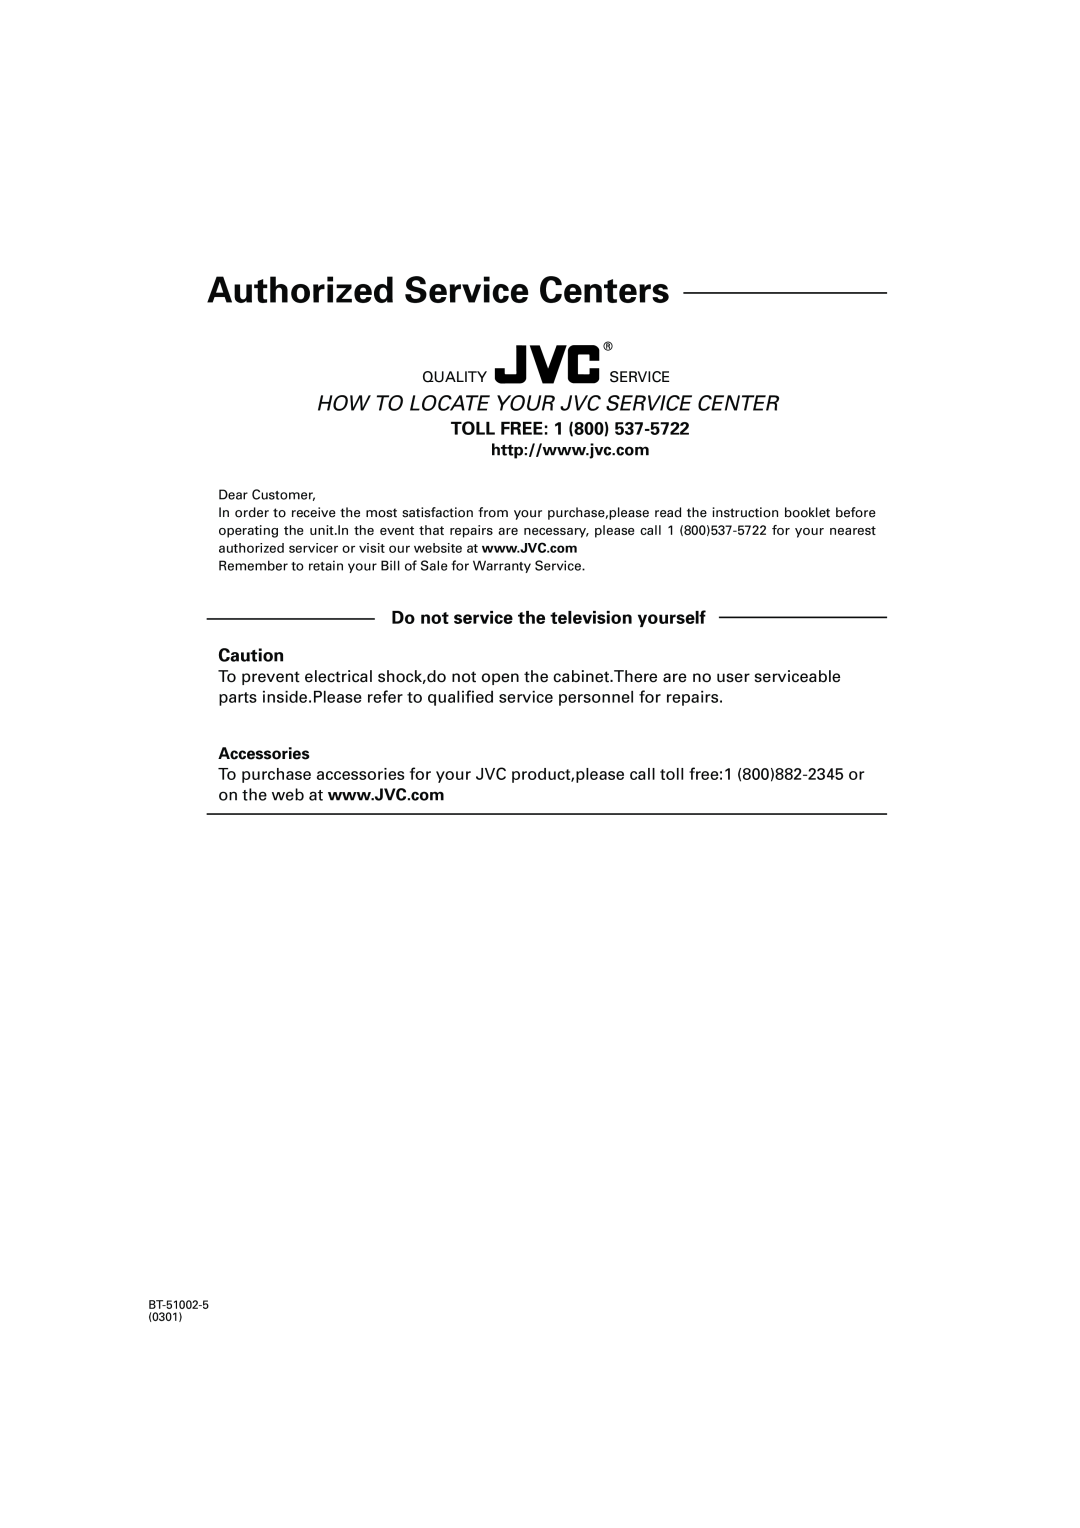 JVC RX-7040B, RX-7042S Accessories, Authorized Service Centers, How To Locate Your Jvc Service Center, TOLL FREE: 1 800 